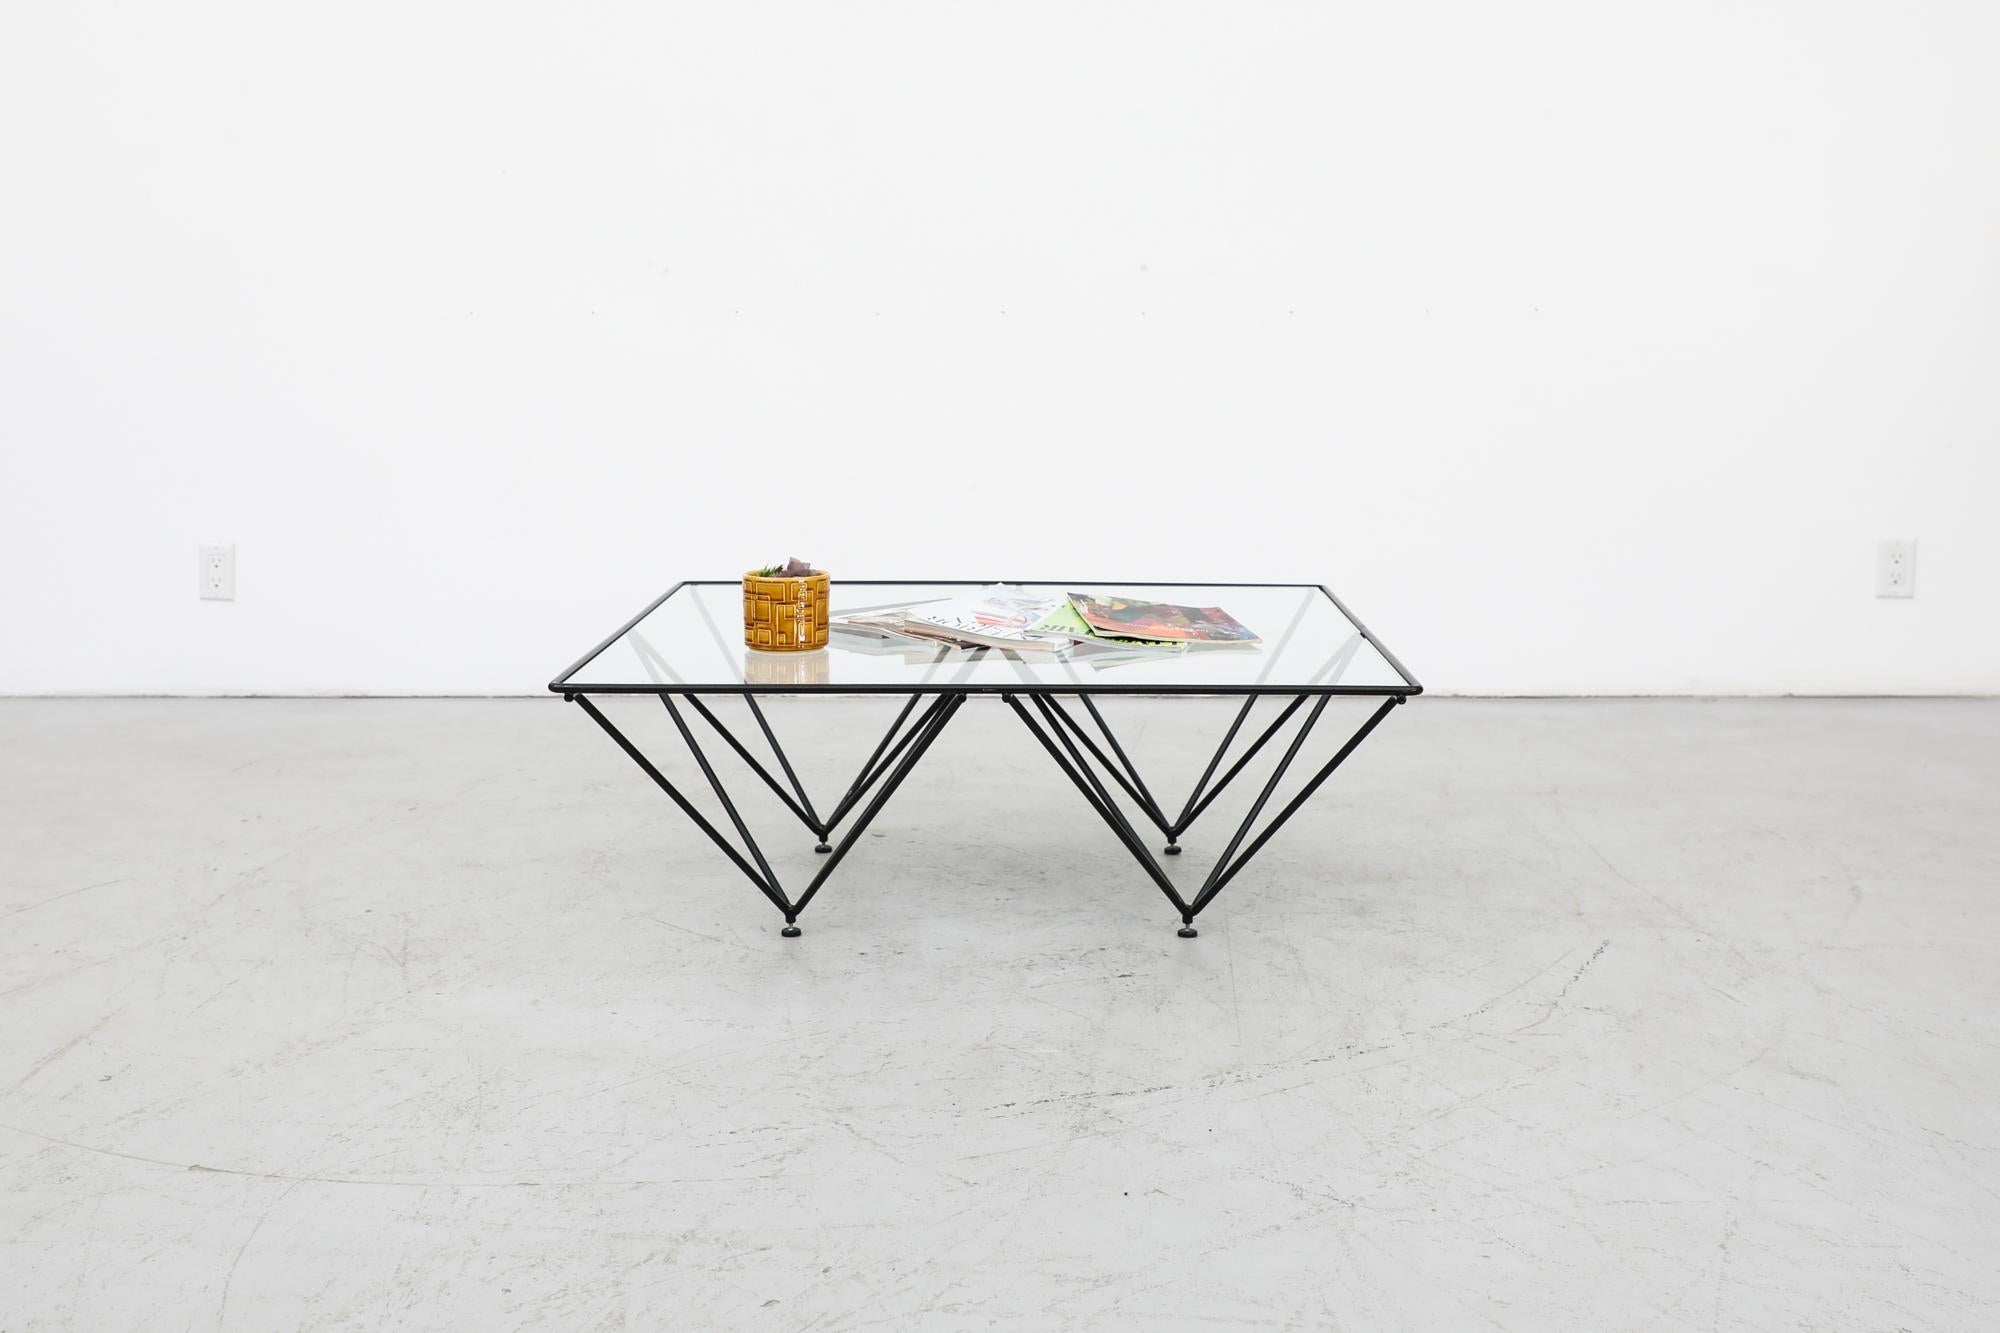 Italian Mid-Century square glass coffee table with black architectural pyramid frame. Designed in the style of the 'Alanda' table by Paolo Piva. The frame is black enameled metal with four upside down pyramids and adjustable feet, the glass is